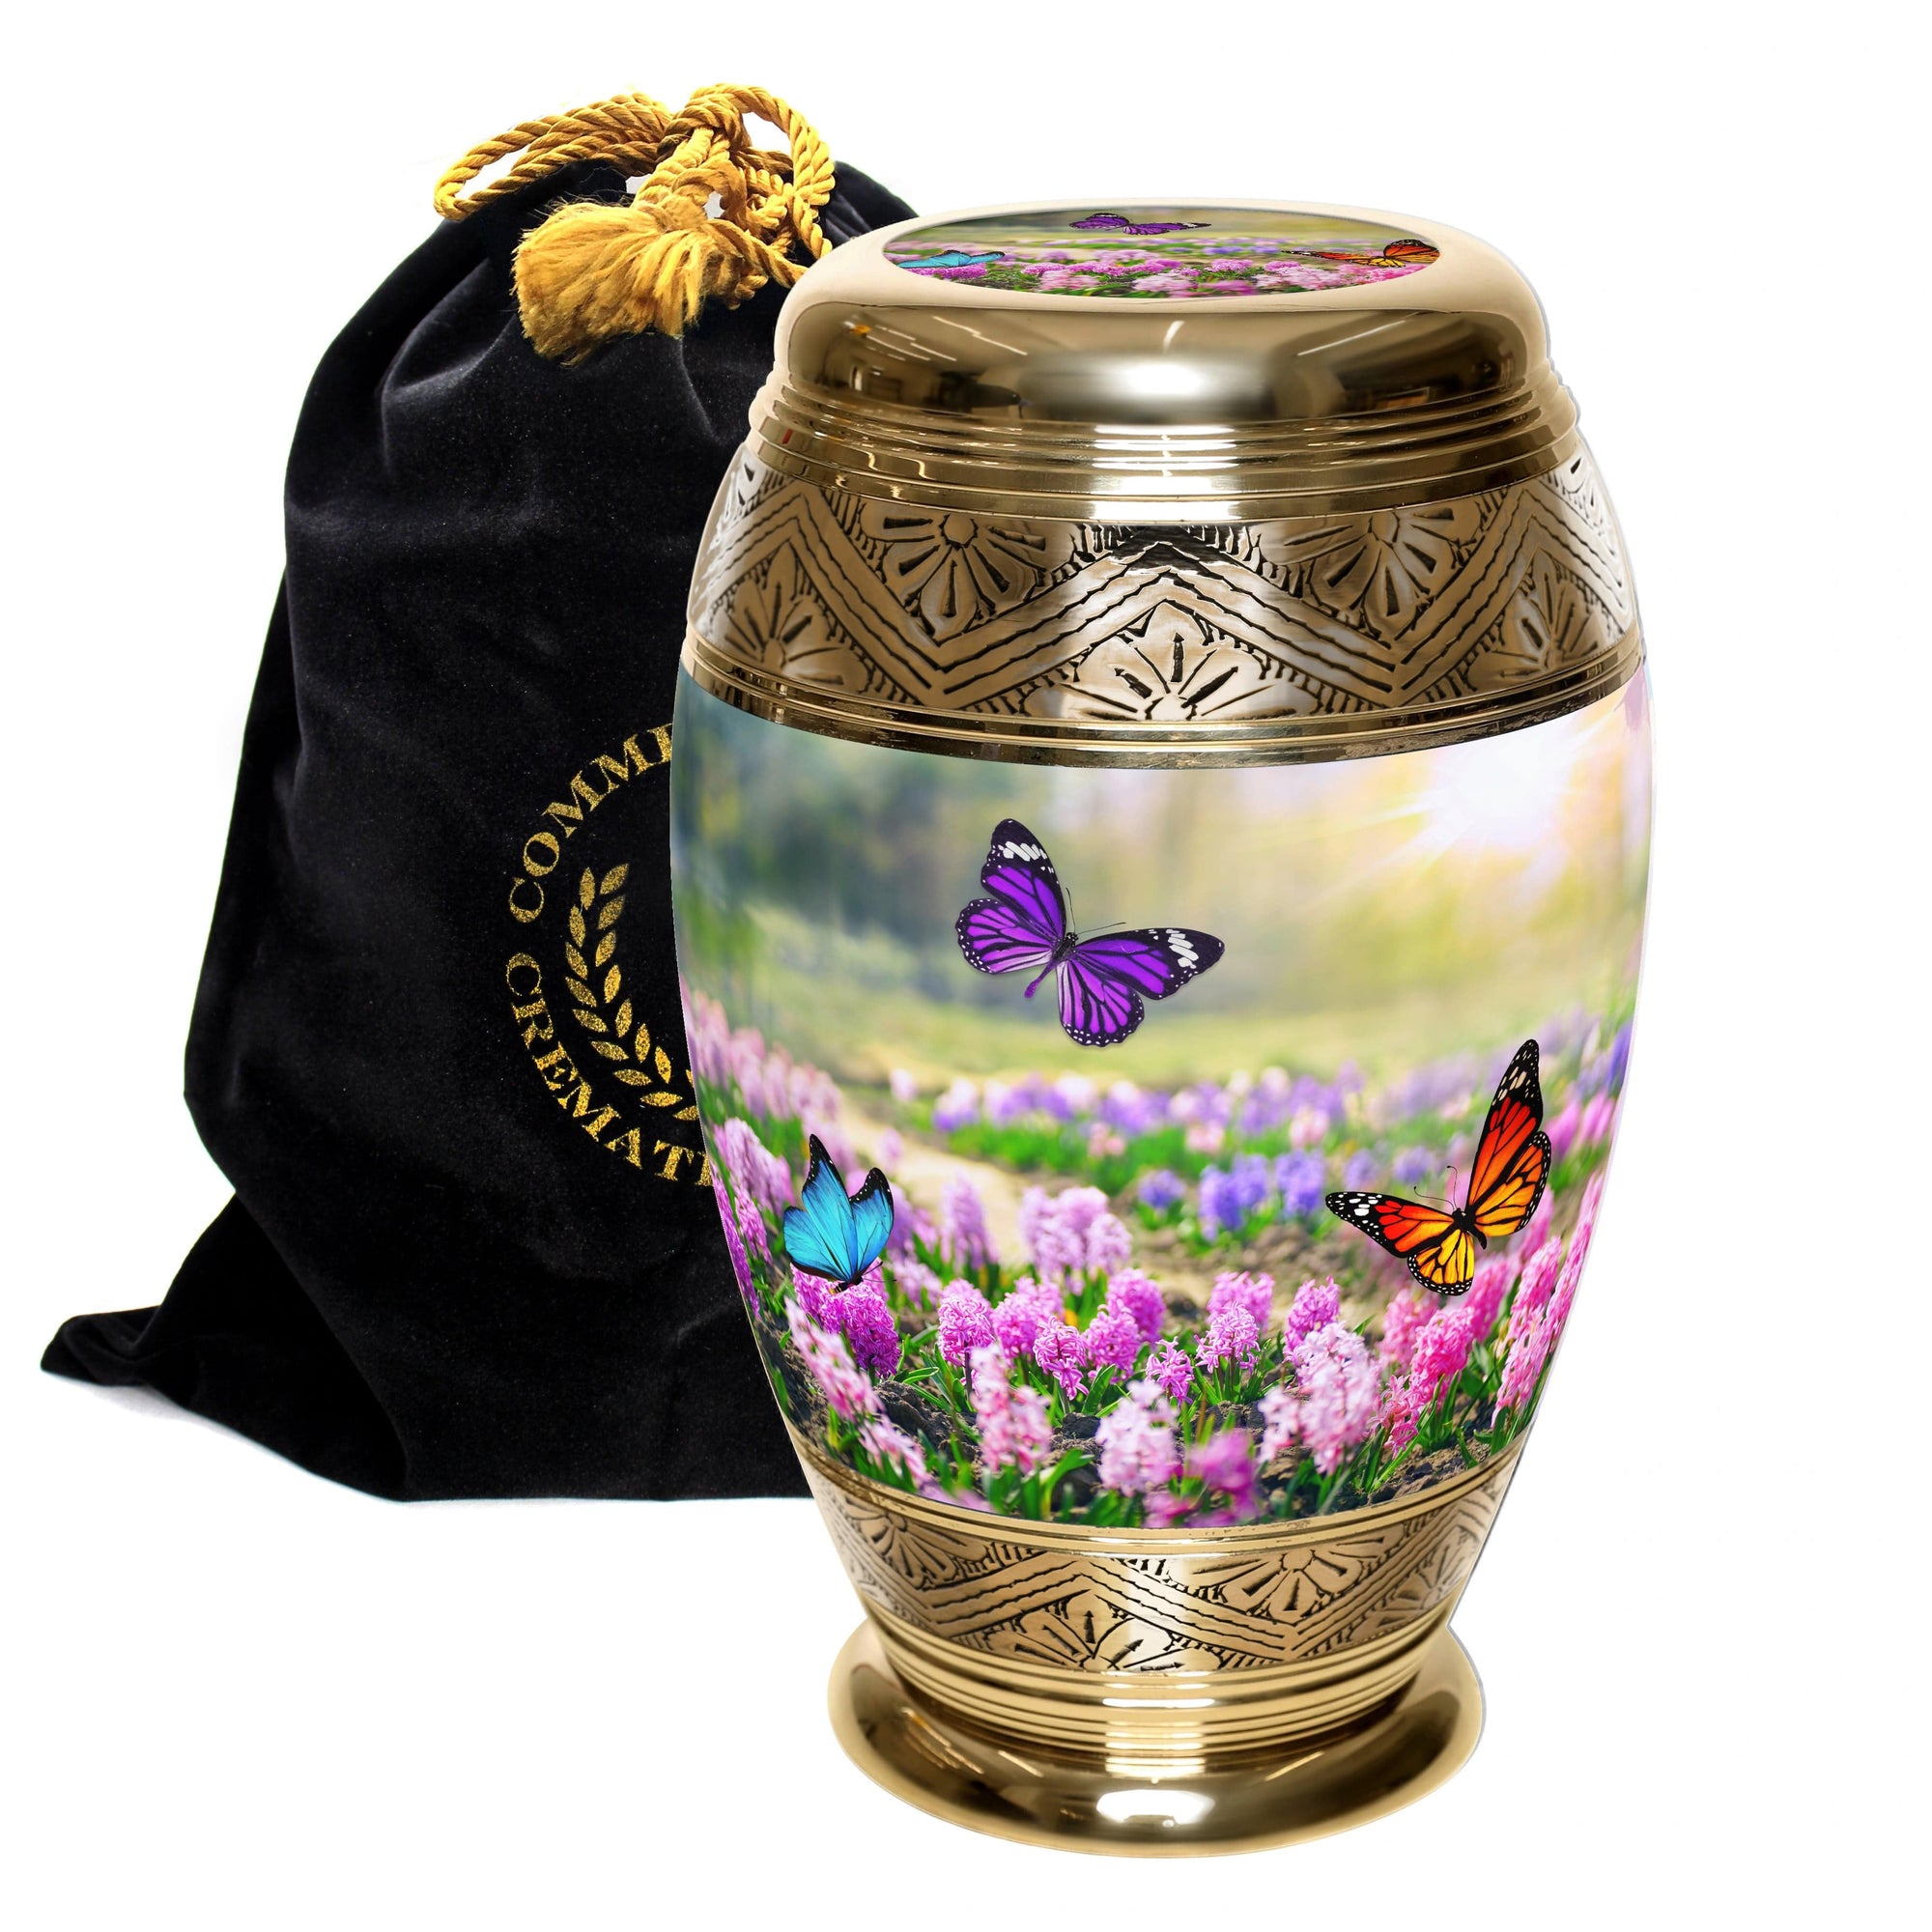 Commemorative Cremation Urns Home & Garden Large Blissful Butterflies Cremation Urns